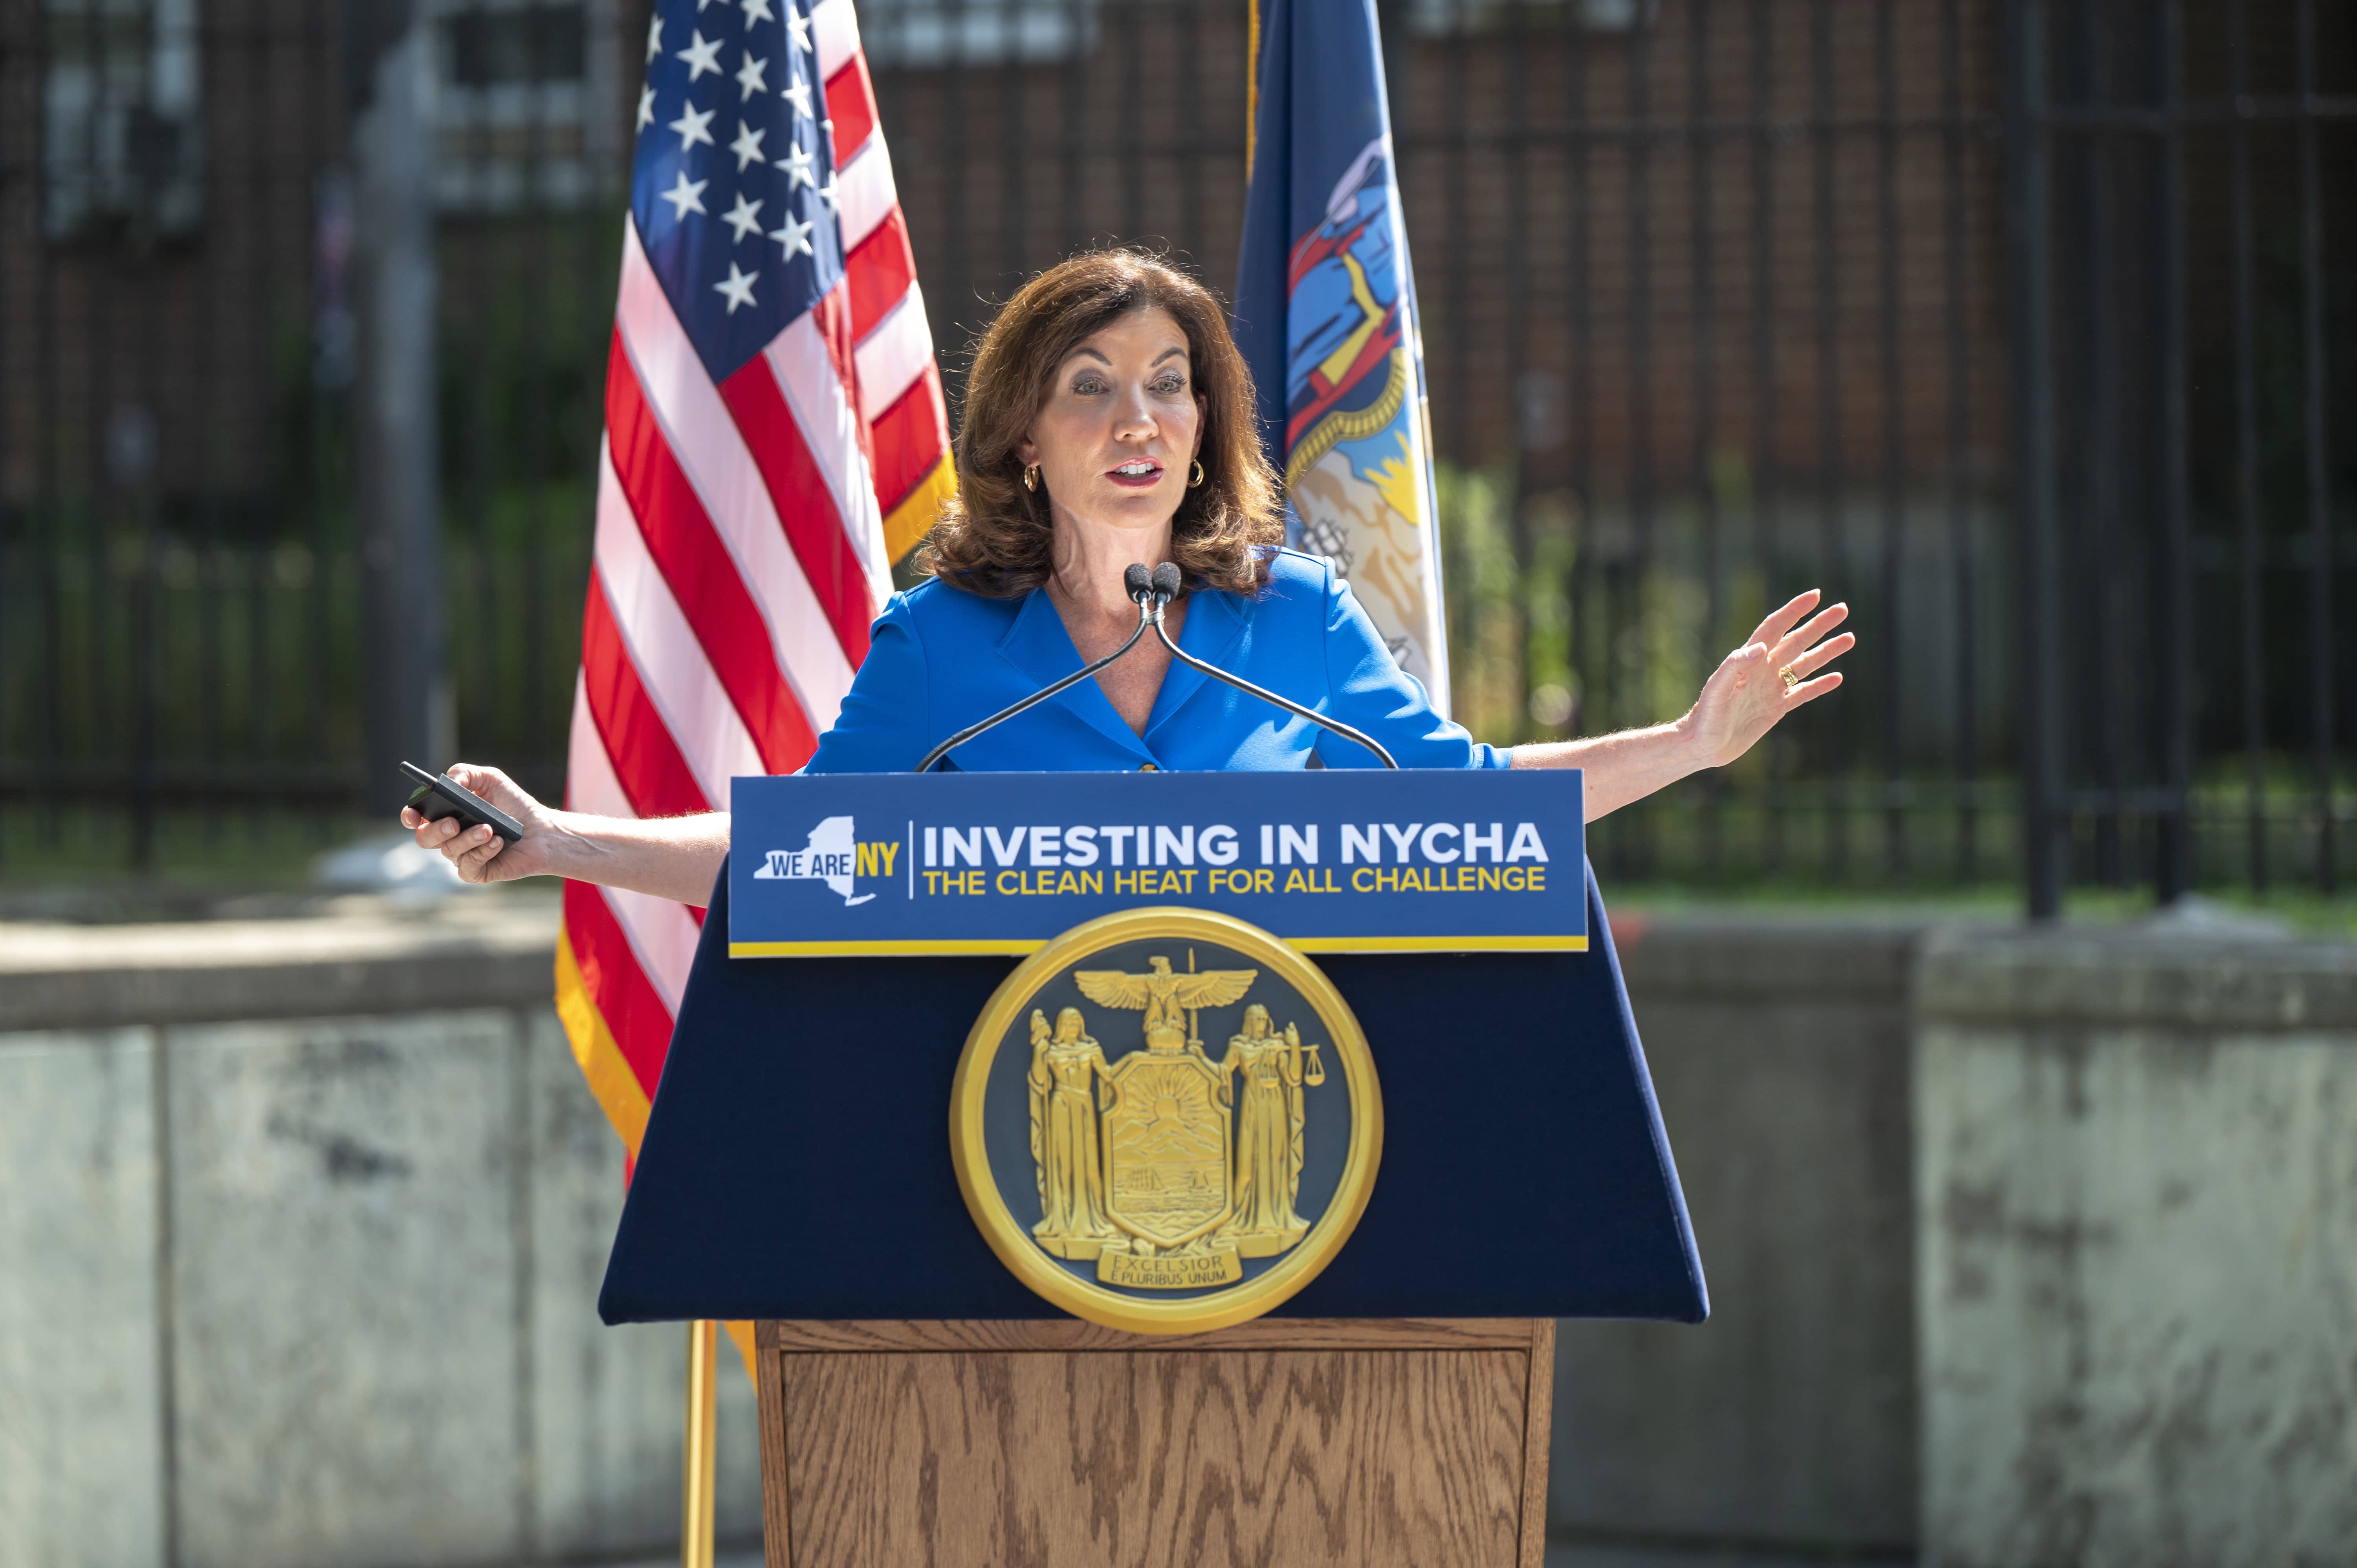 governor-hochul-and-mayor-adams-announce-70-million-investment-to-decarbonize-nycha-buildings-in-nyc-02-aug-2022-2